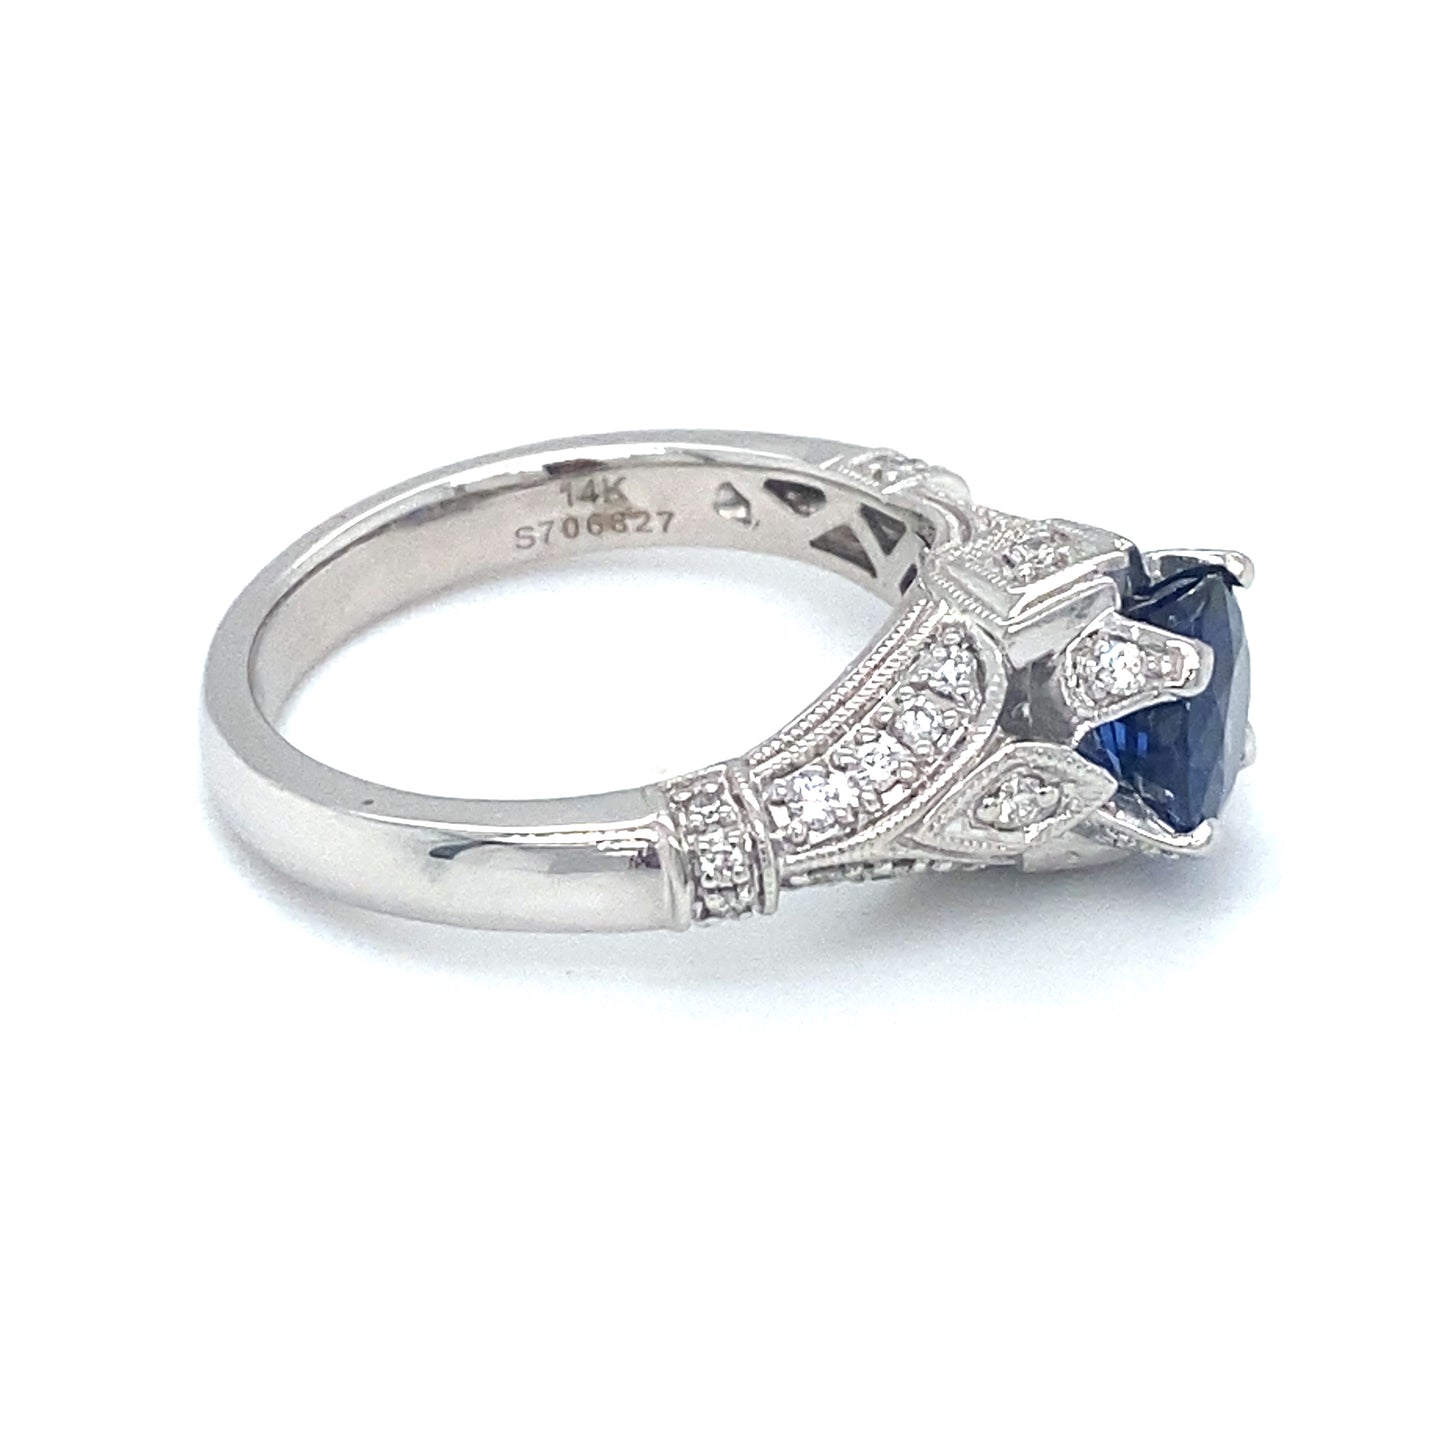 GABRIEL & CO 2.0ct Iolite and Diamond Engagement Ring in 14K White Gold